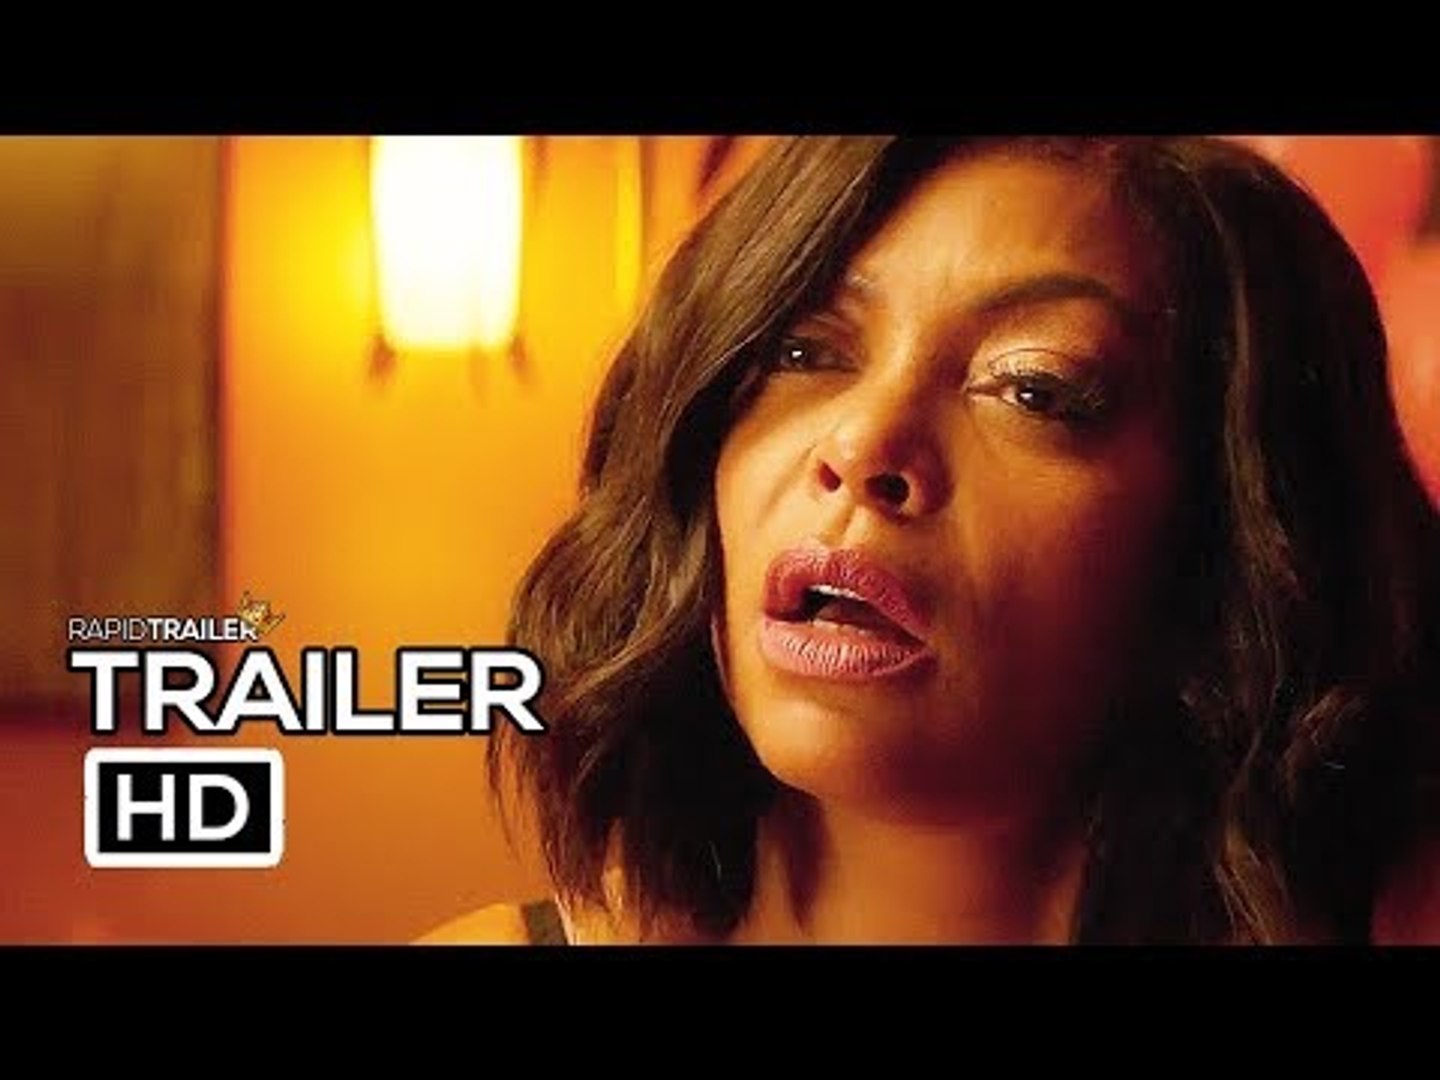 WHAT MEN WANT, Official Trailer